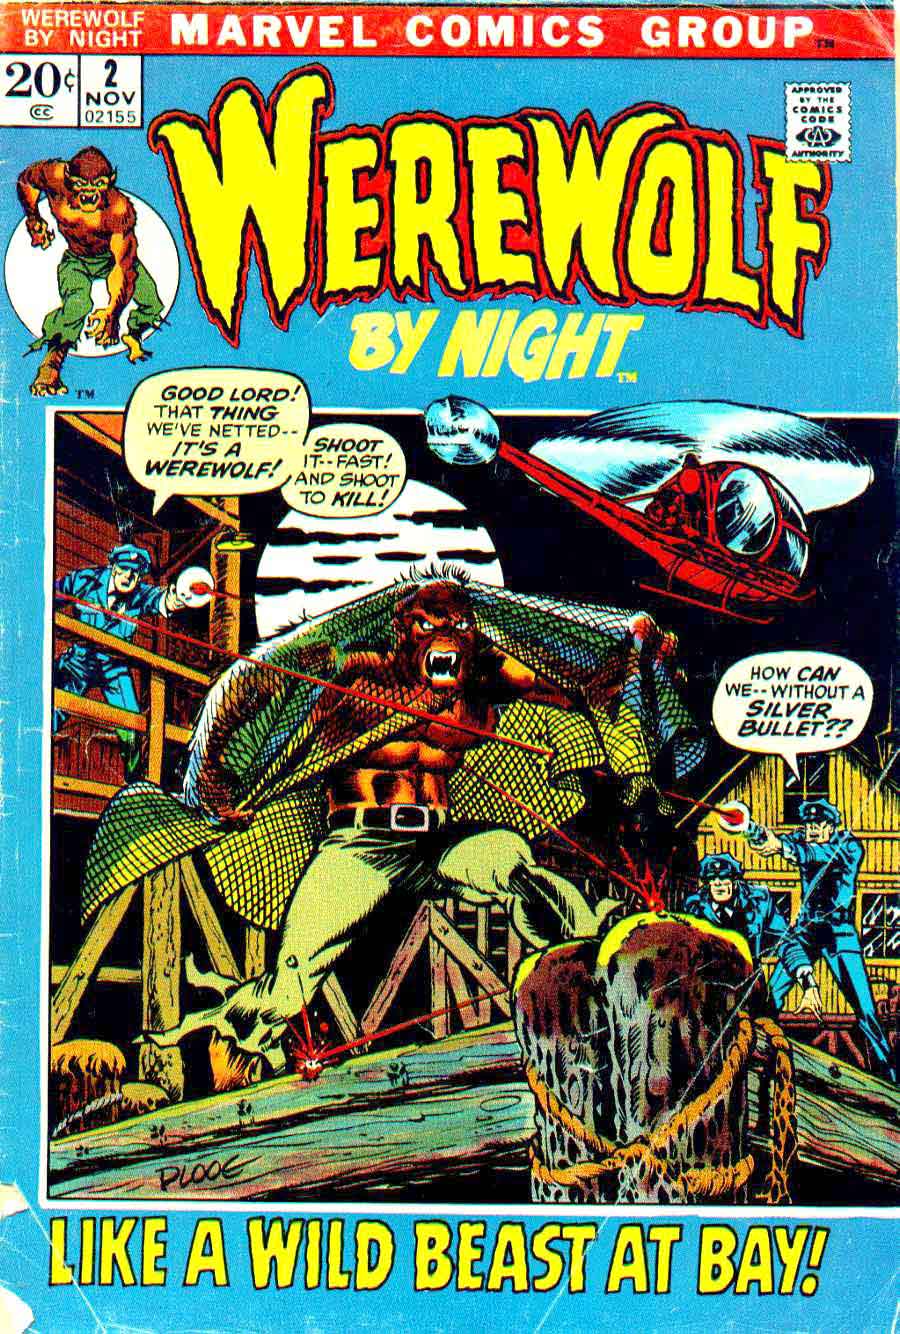 Werewolf by Night #2 bronze age 1970s marvel horror comic book cover art by Mike Ploog